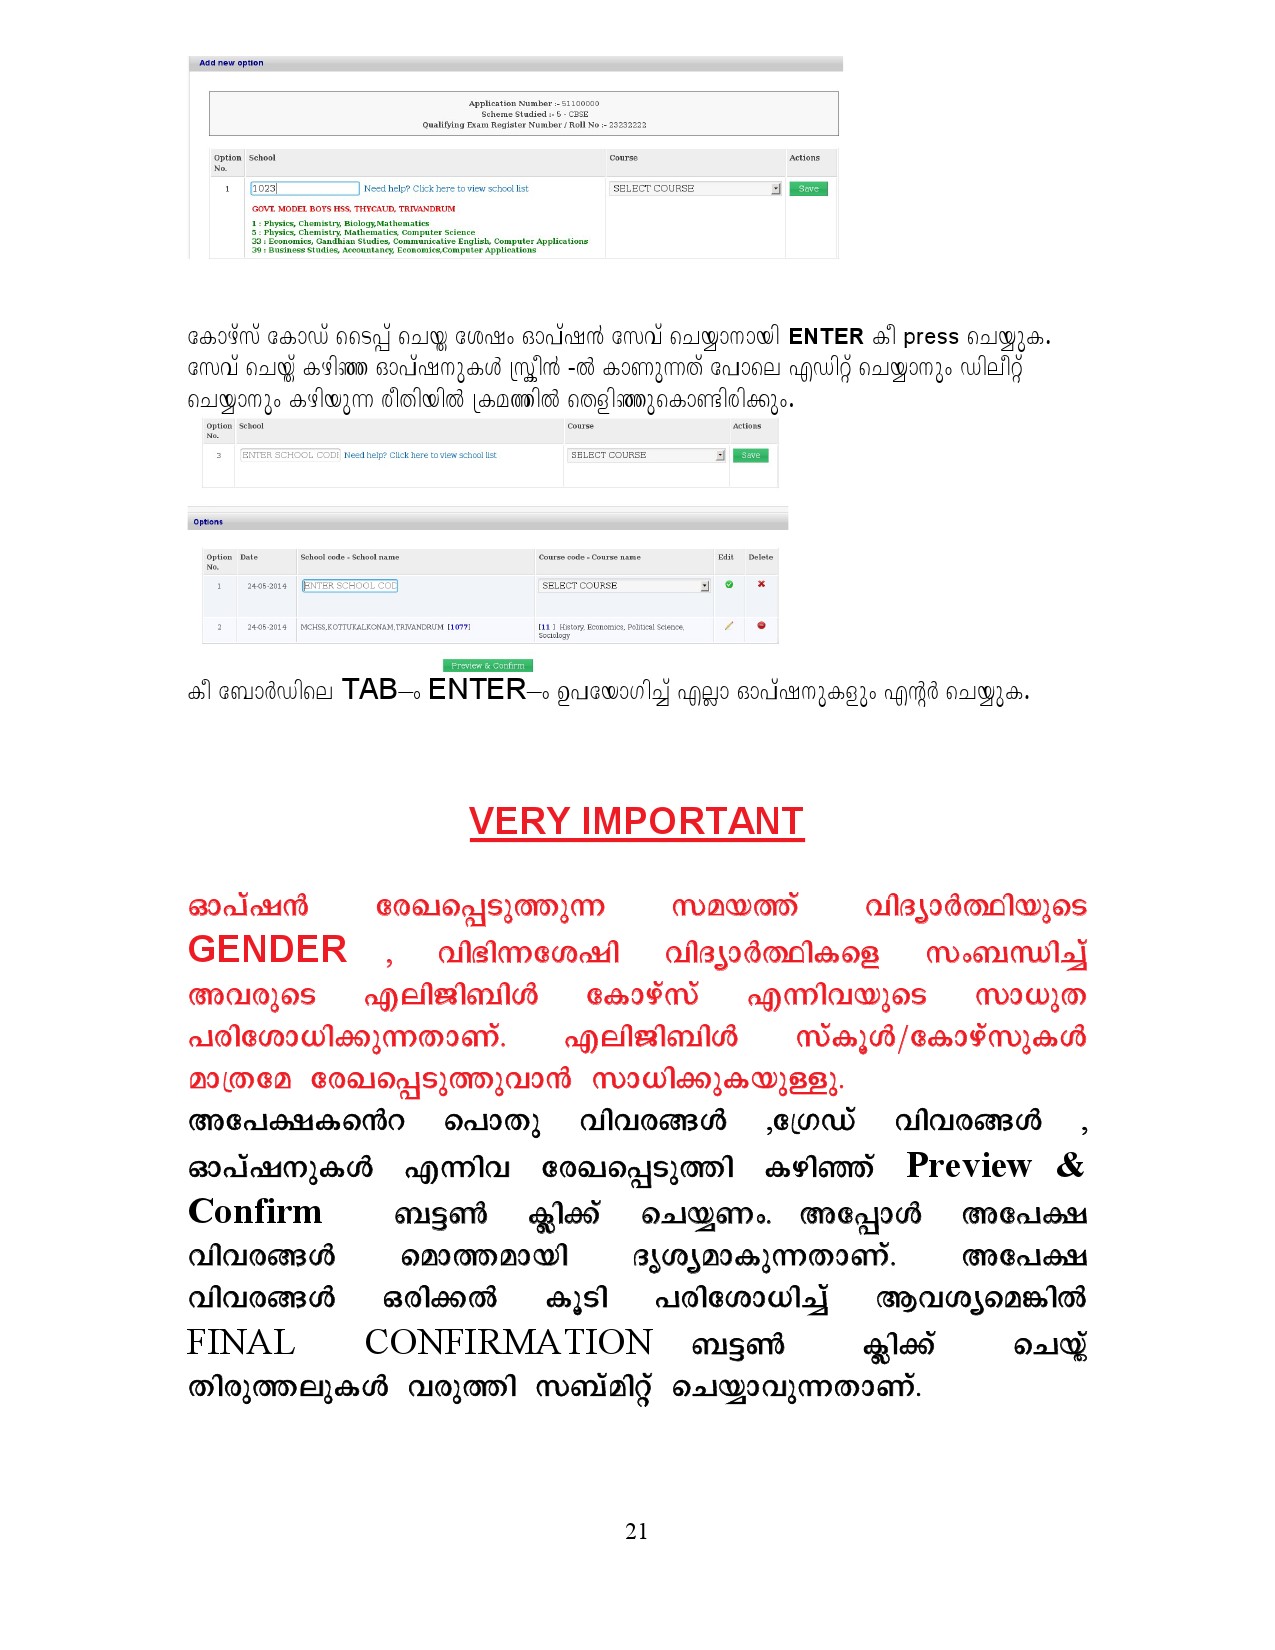 Higher Secondary School Online Application Manual in Malayalam - Notification Image 21